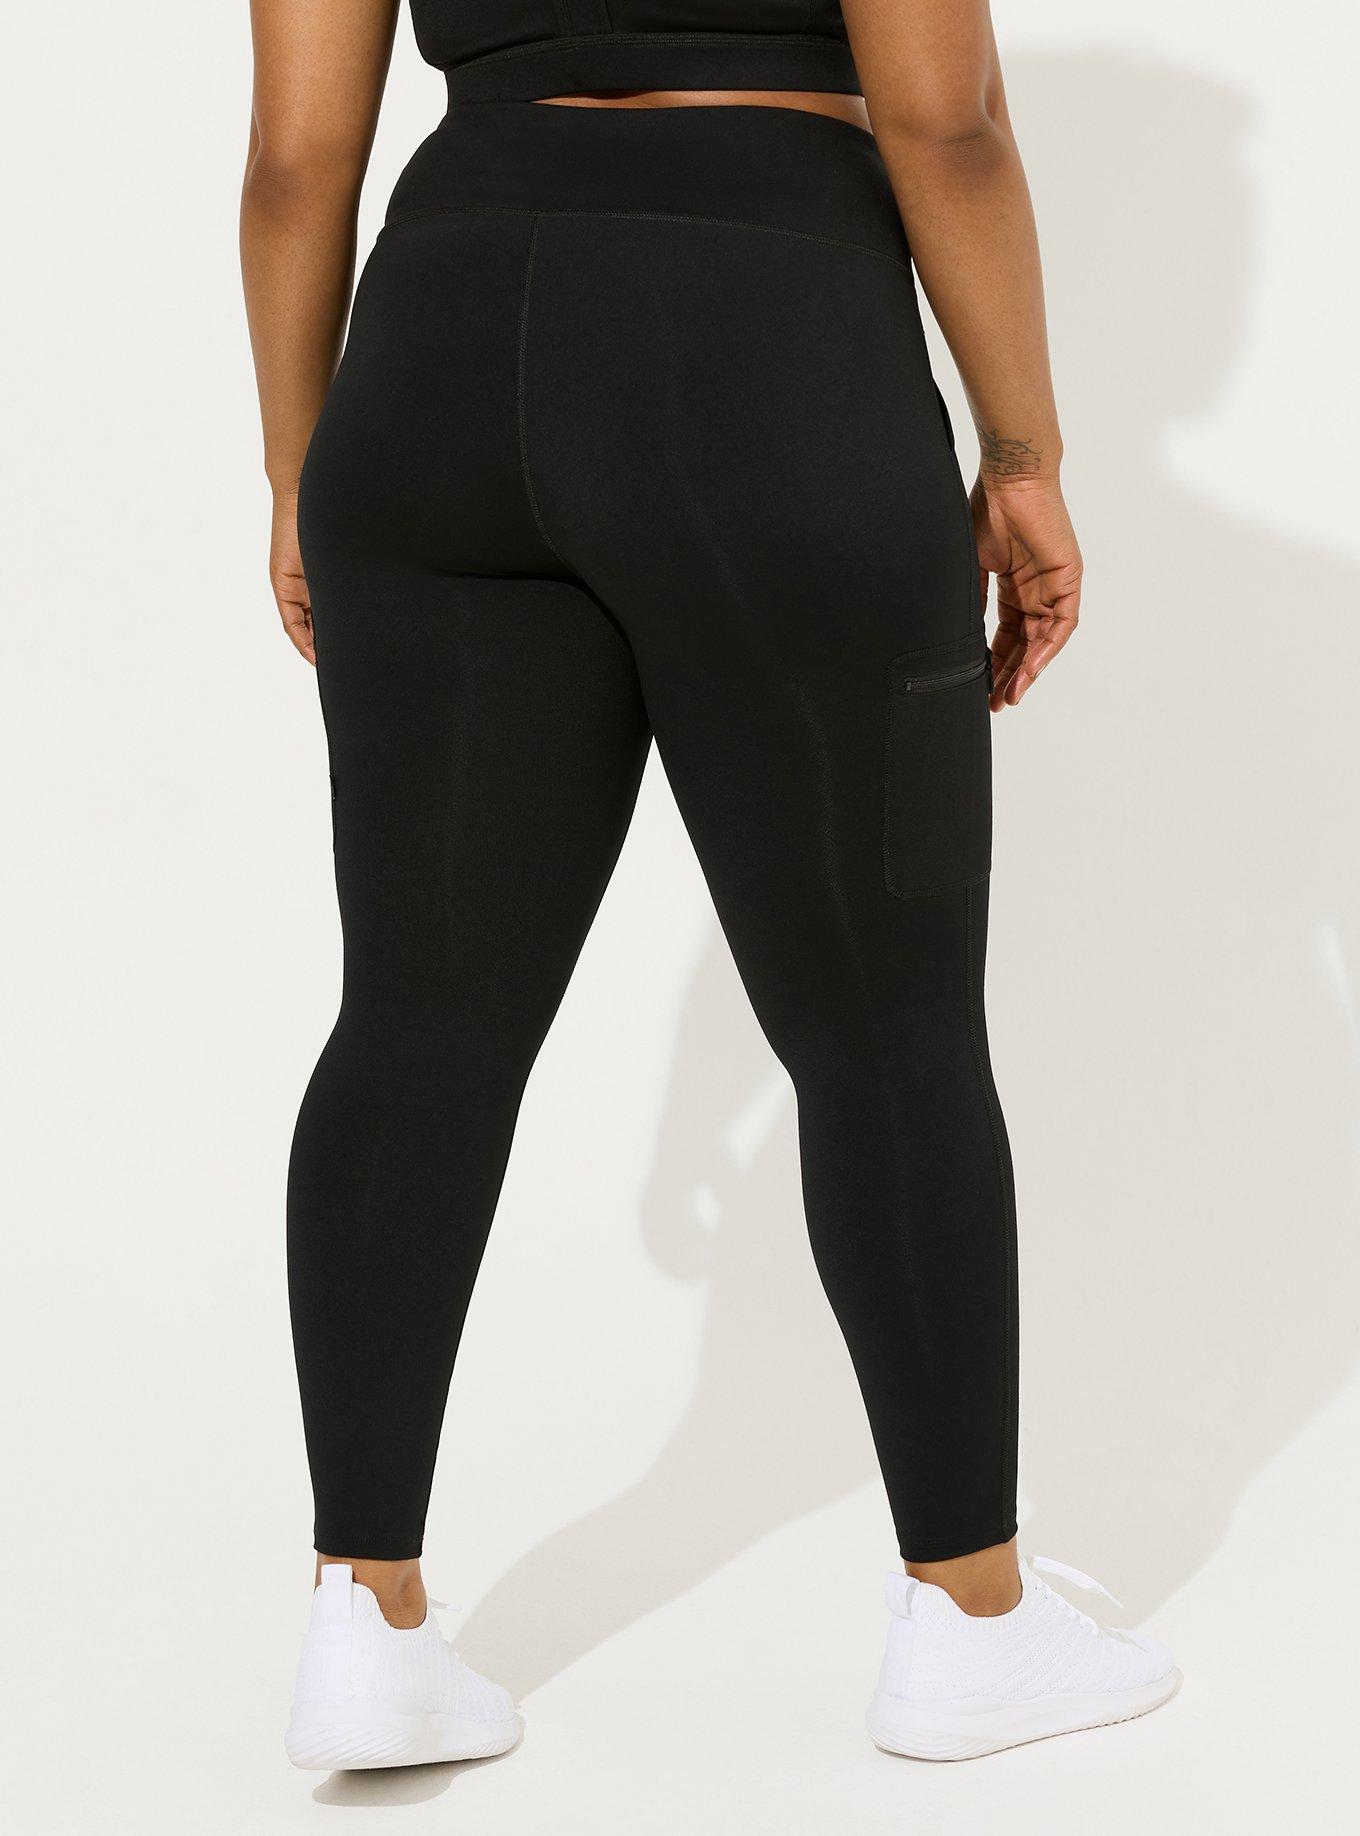  Happy.angel Plus Size High Waisted Leggings for Women, Soft  Black Yoga Workout Leggings 3X 4X : Clothing, Shoes & Jewelry